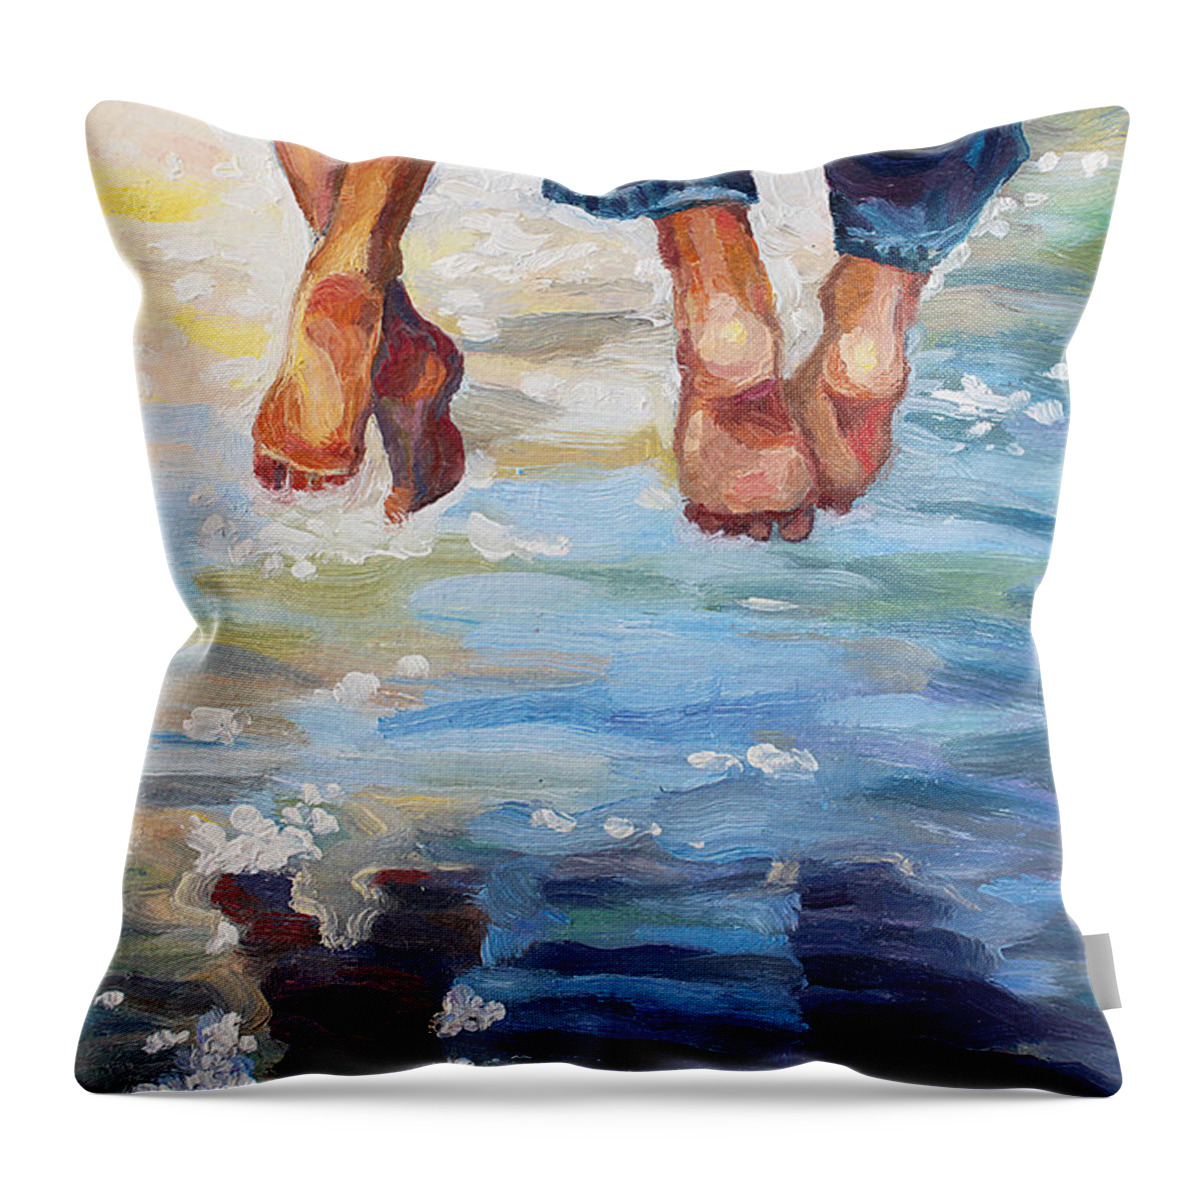 Love Throw Pillow featuring the painting Simply Together by Alina Malykhina